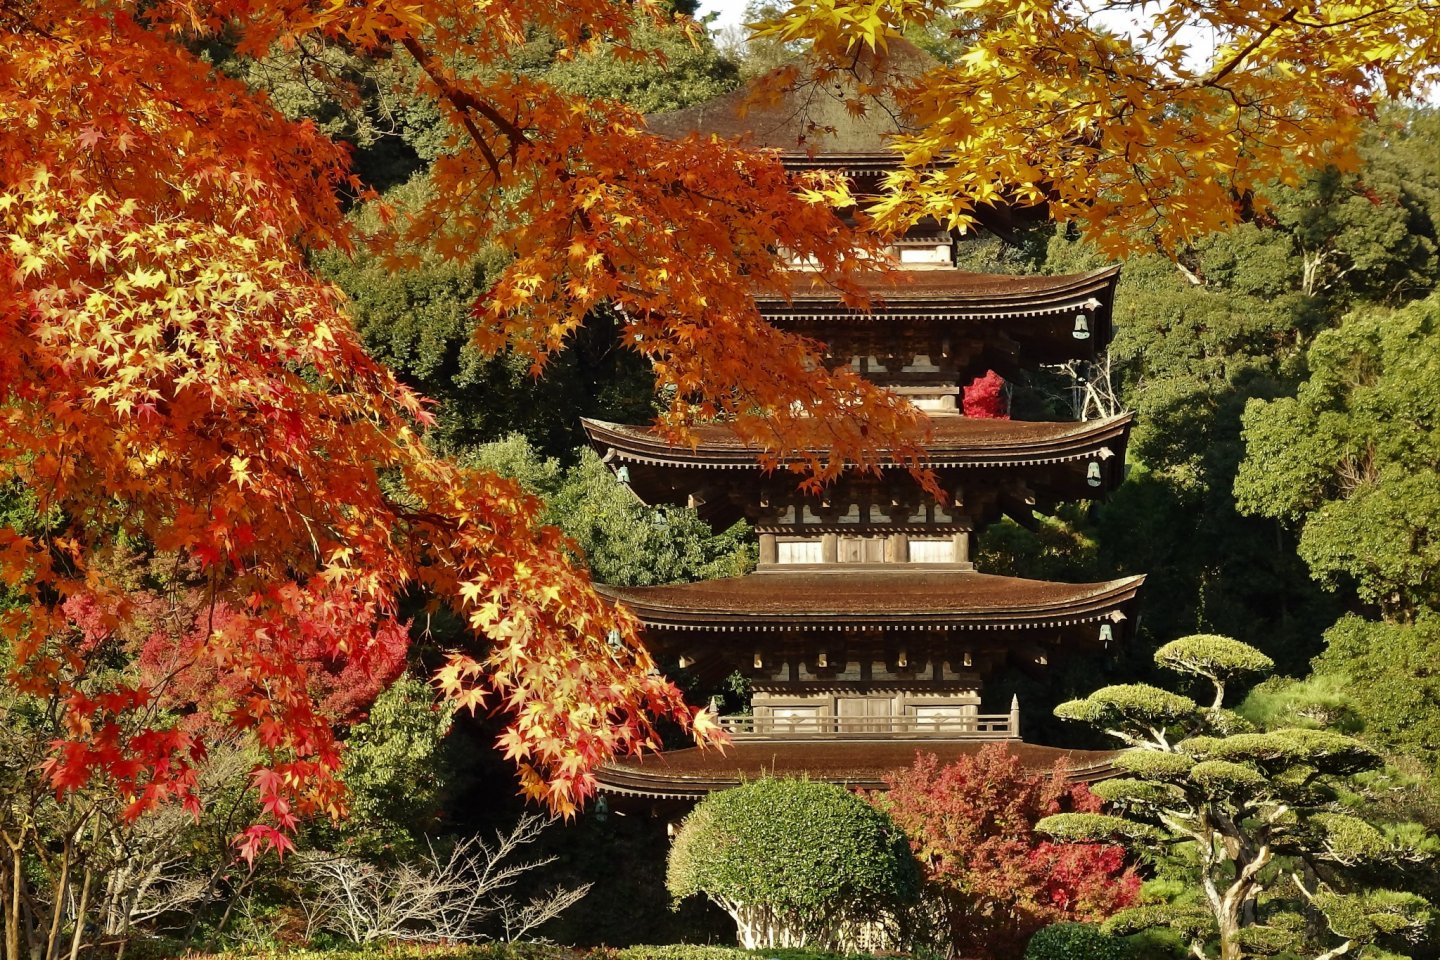 Rurikoji Temple is at its most beautiful in autumn